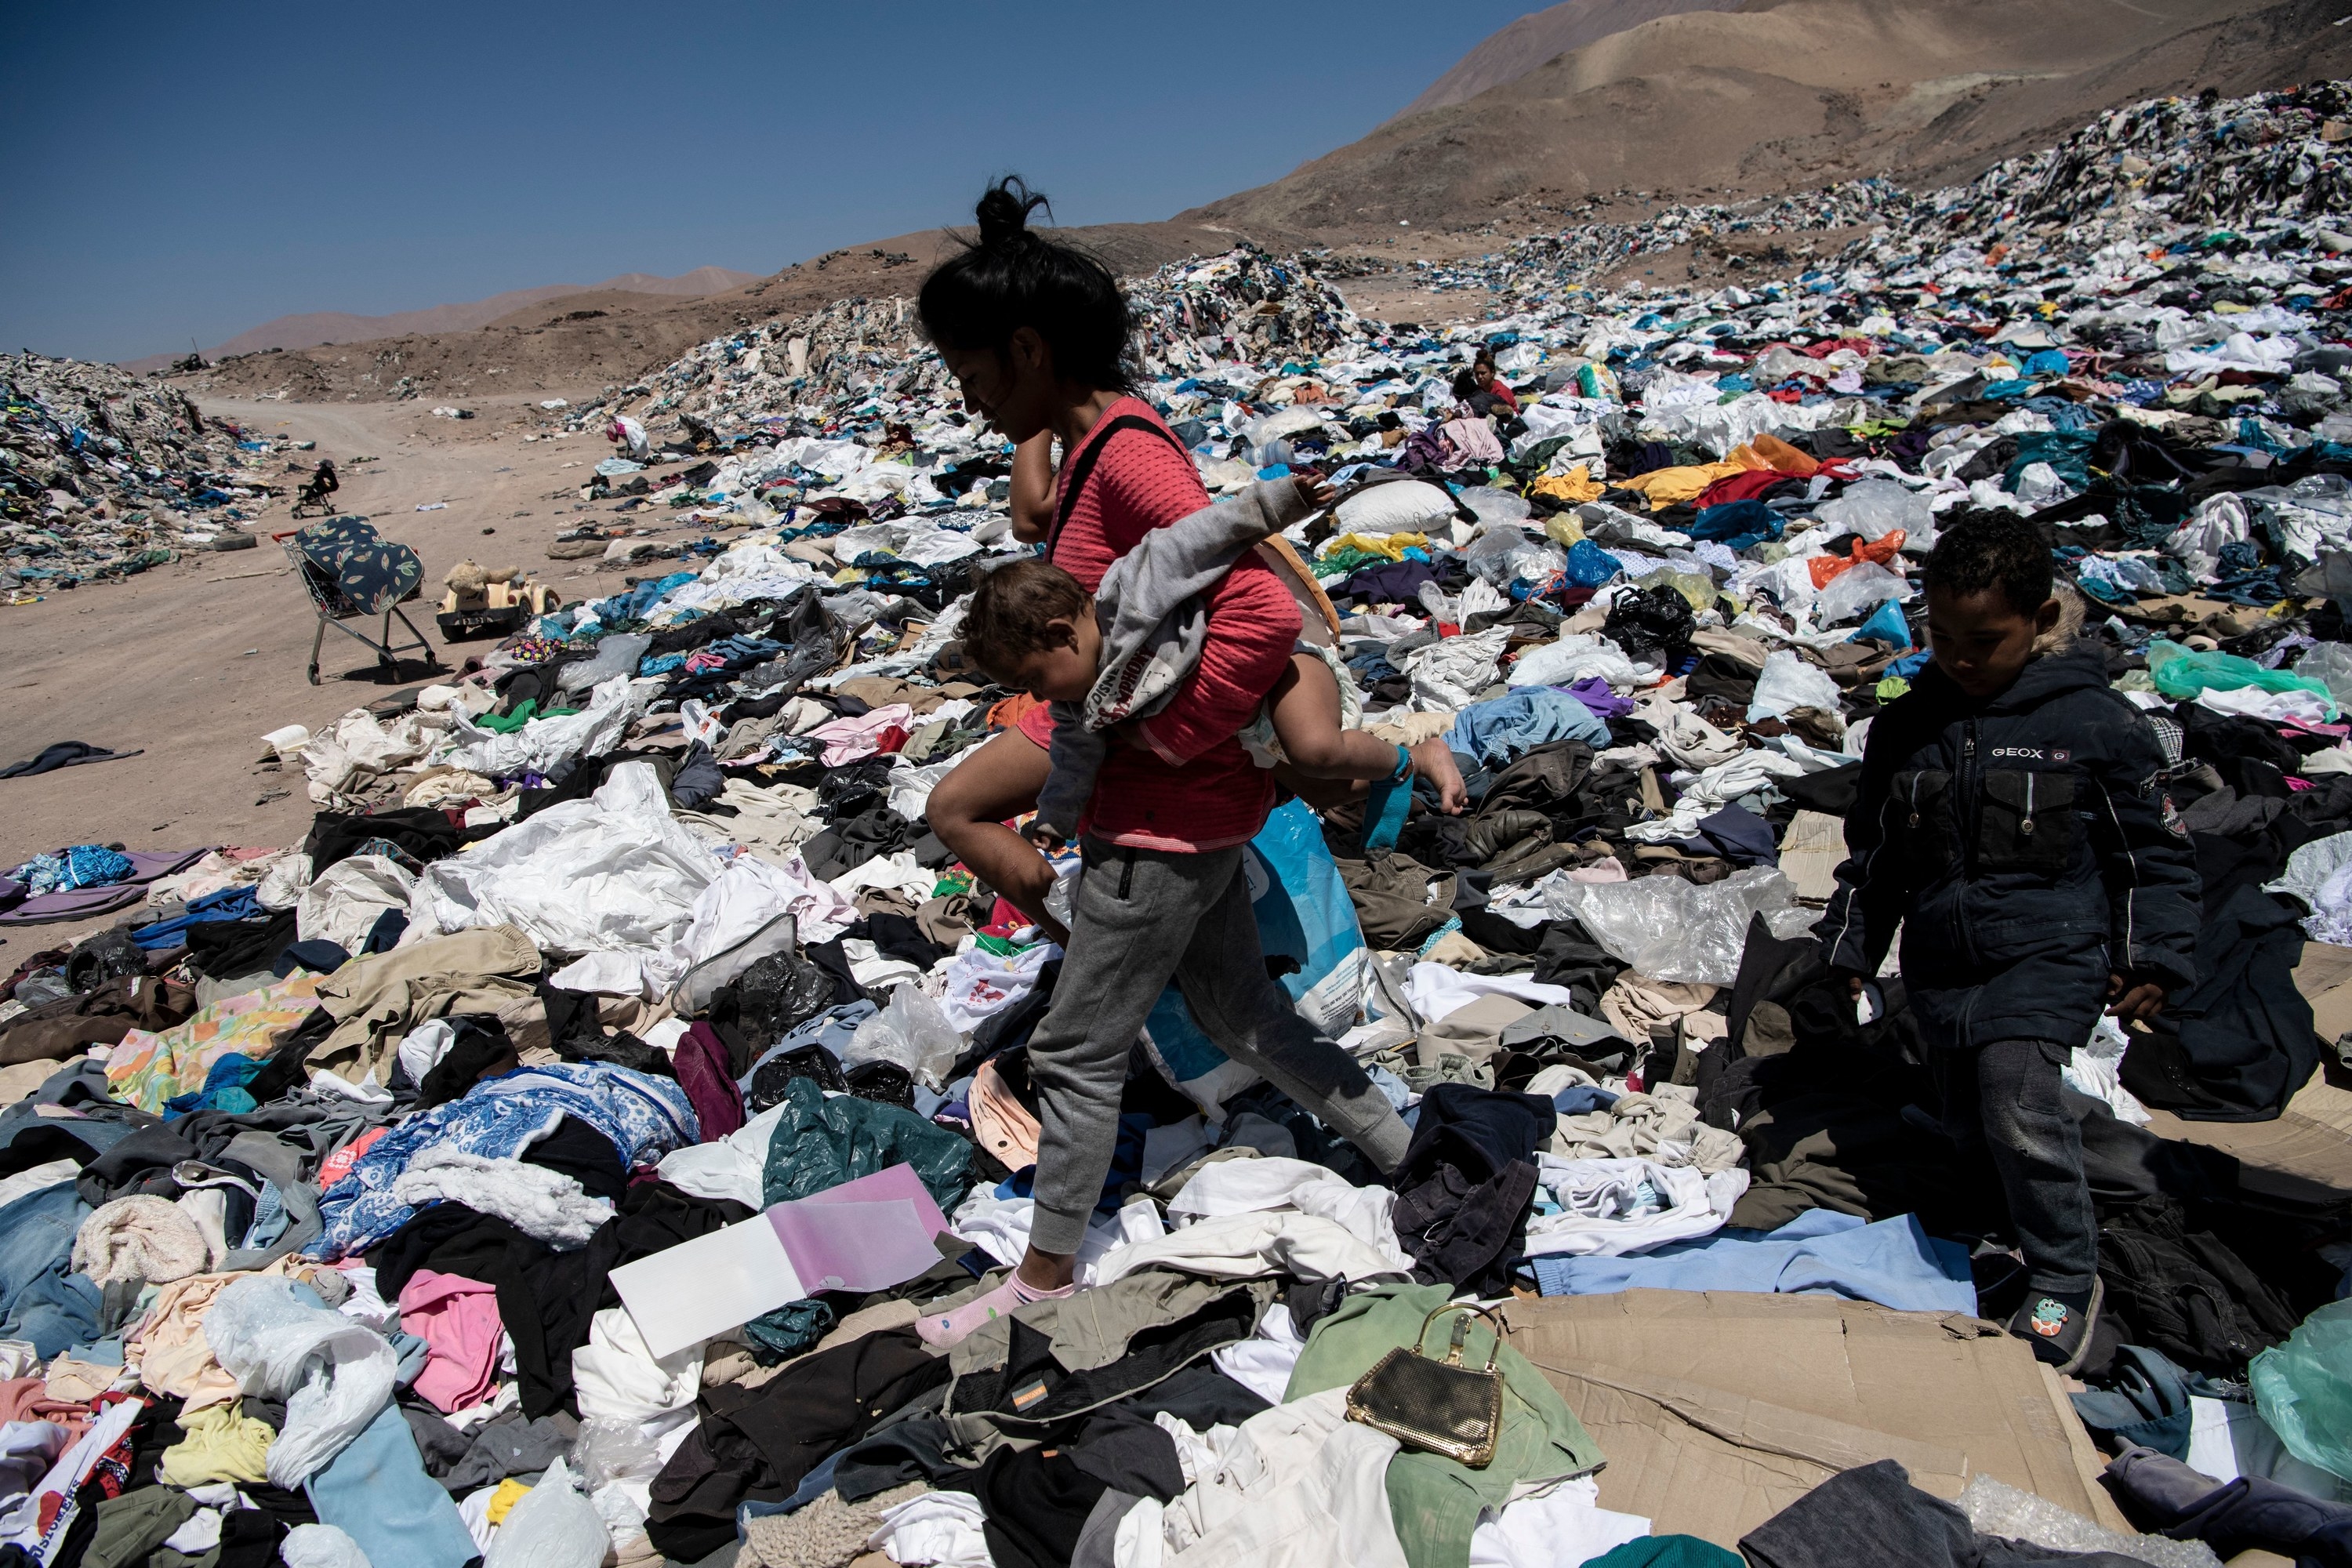 Person carries a child and walks among trash in the desert in South America